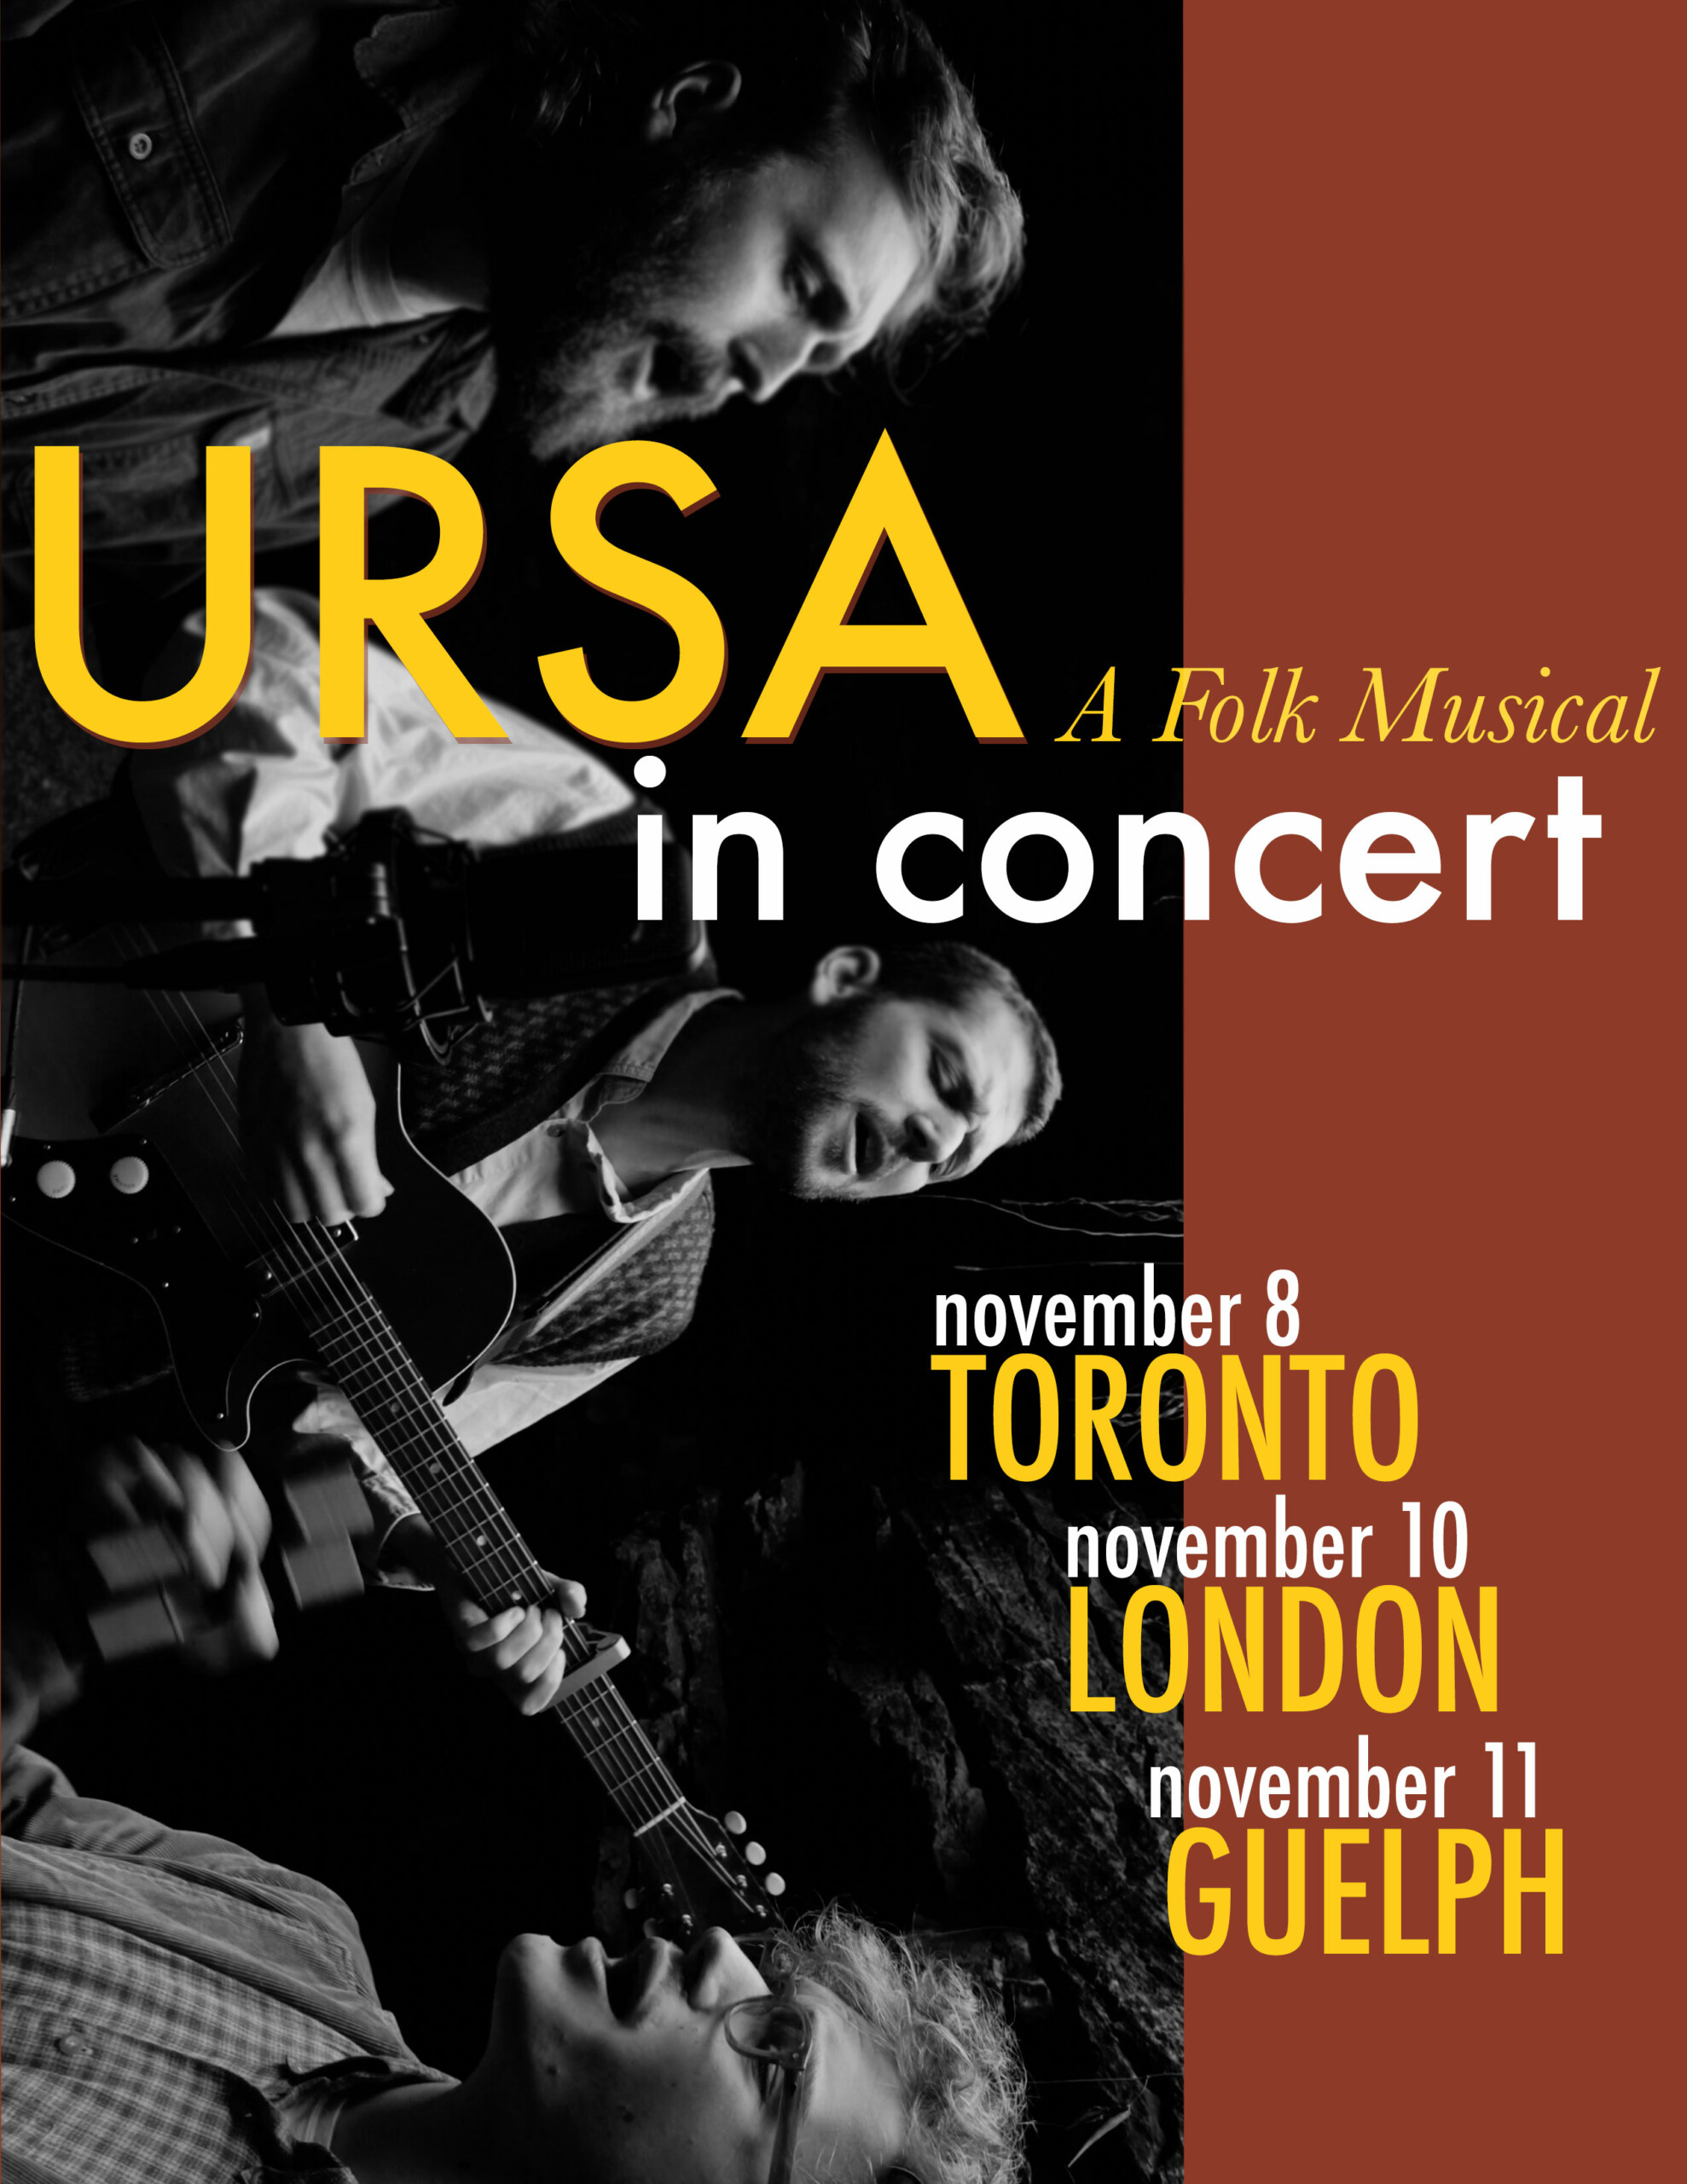 Text: URSA: A Folk Musical in concert November 8 Toronto November 10 London November 11 Guelph Image - black and white, landscape orientation but rotated 90 degrees clockwise, showing 3 musicians singing, one of which is playing guitar.